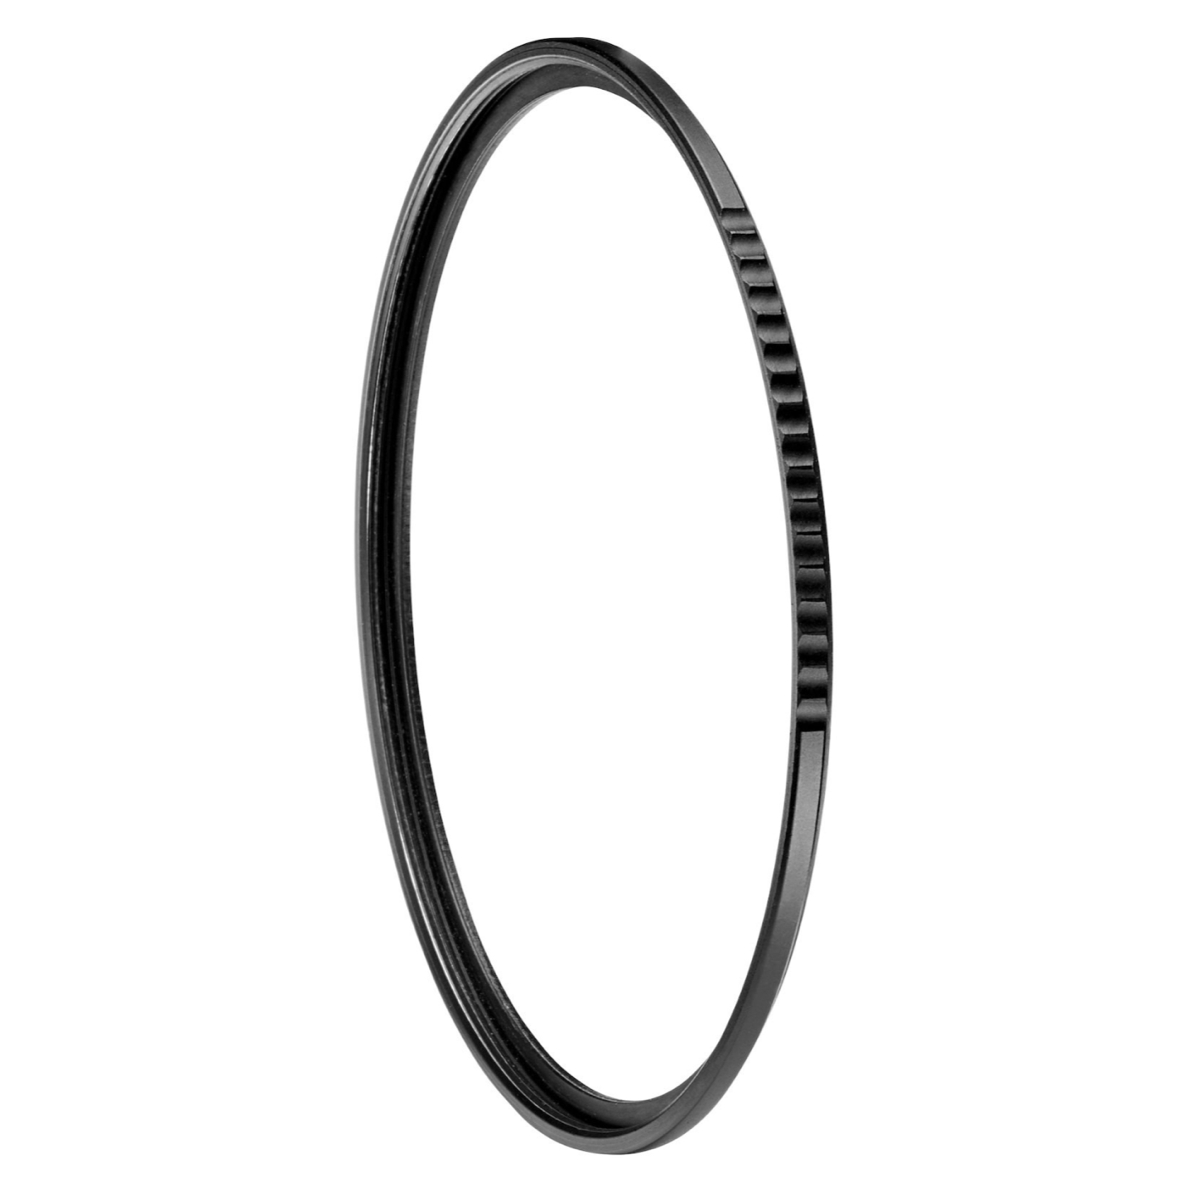 Manfrotto XUME 62mm Filter Adapter